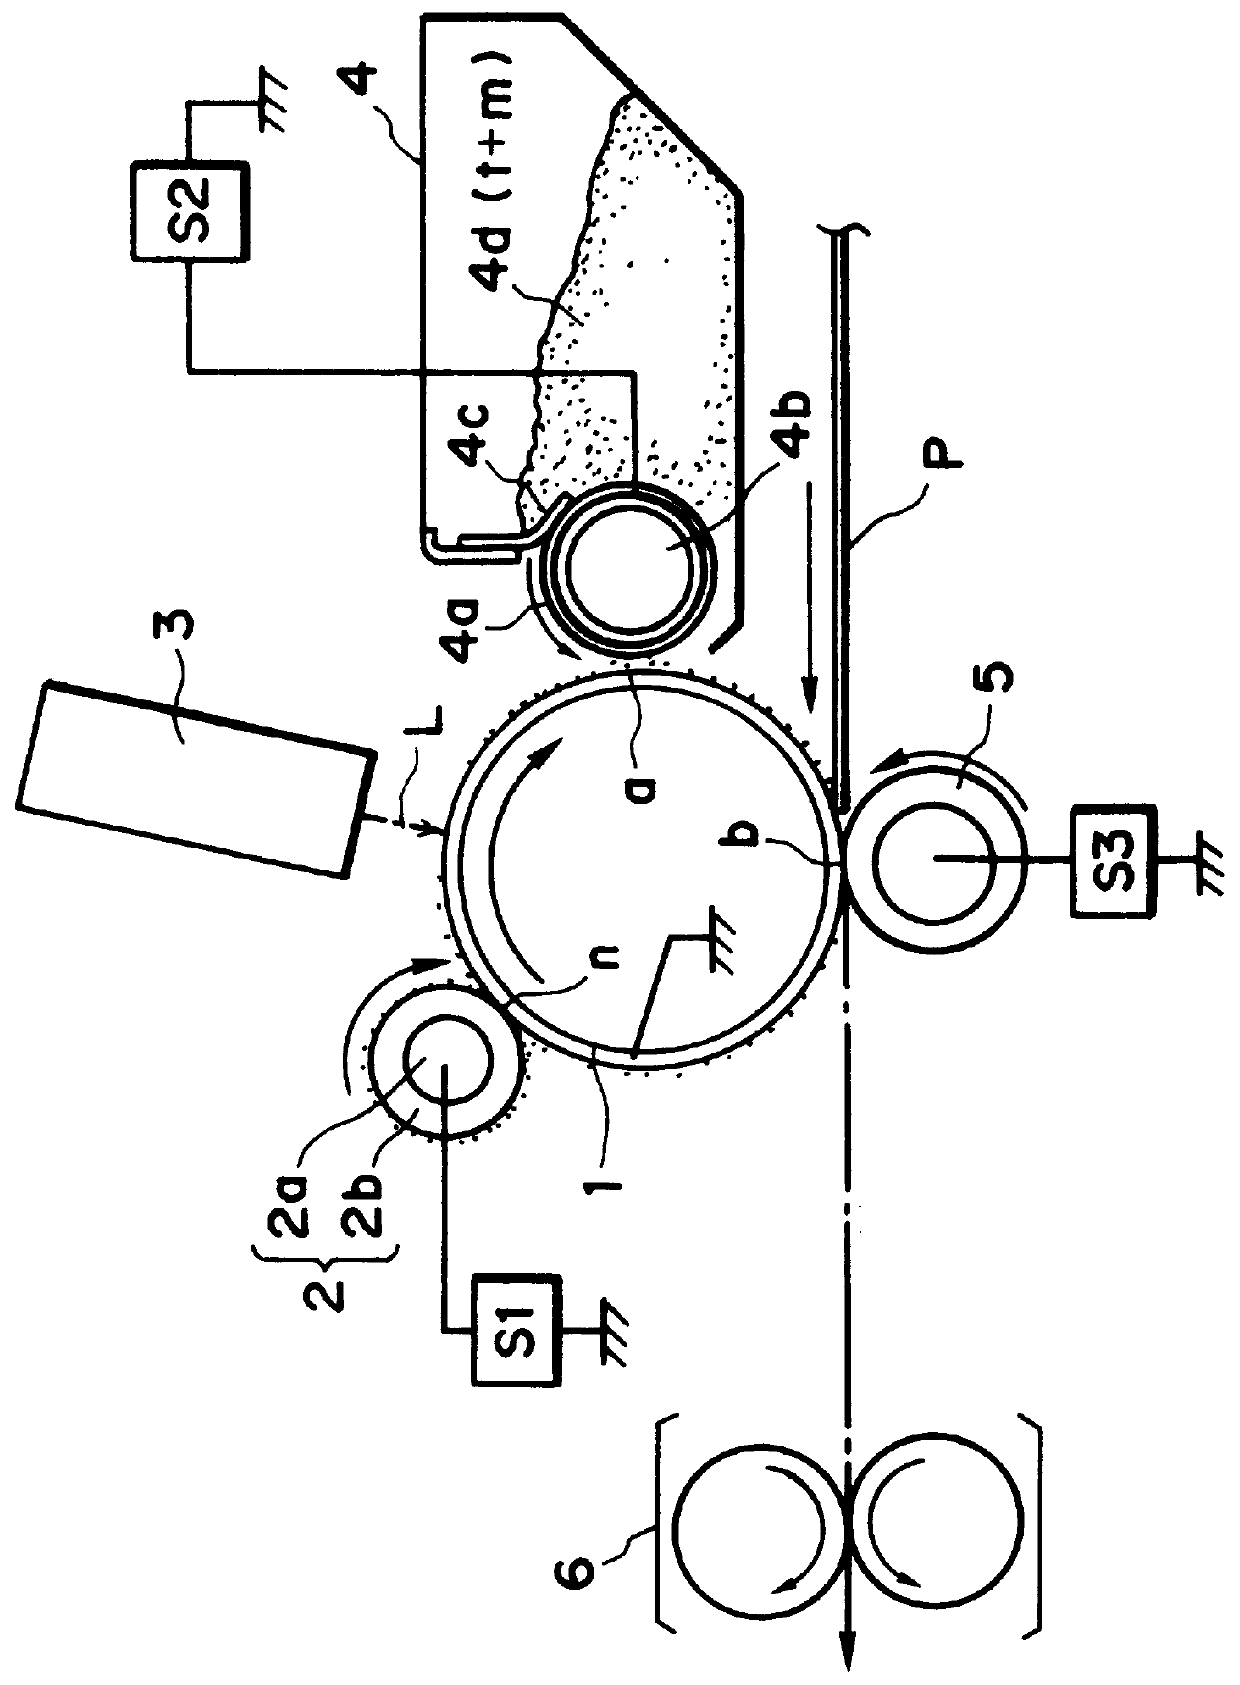 Image forming apparatus having a charging member applying an electric charge through electrically conductive or electroconductive particles to the surface of a photosensitive or image bearing member